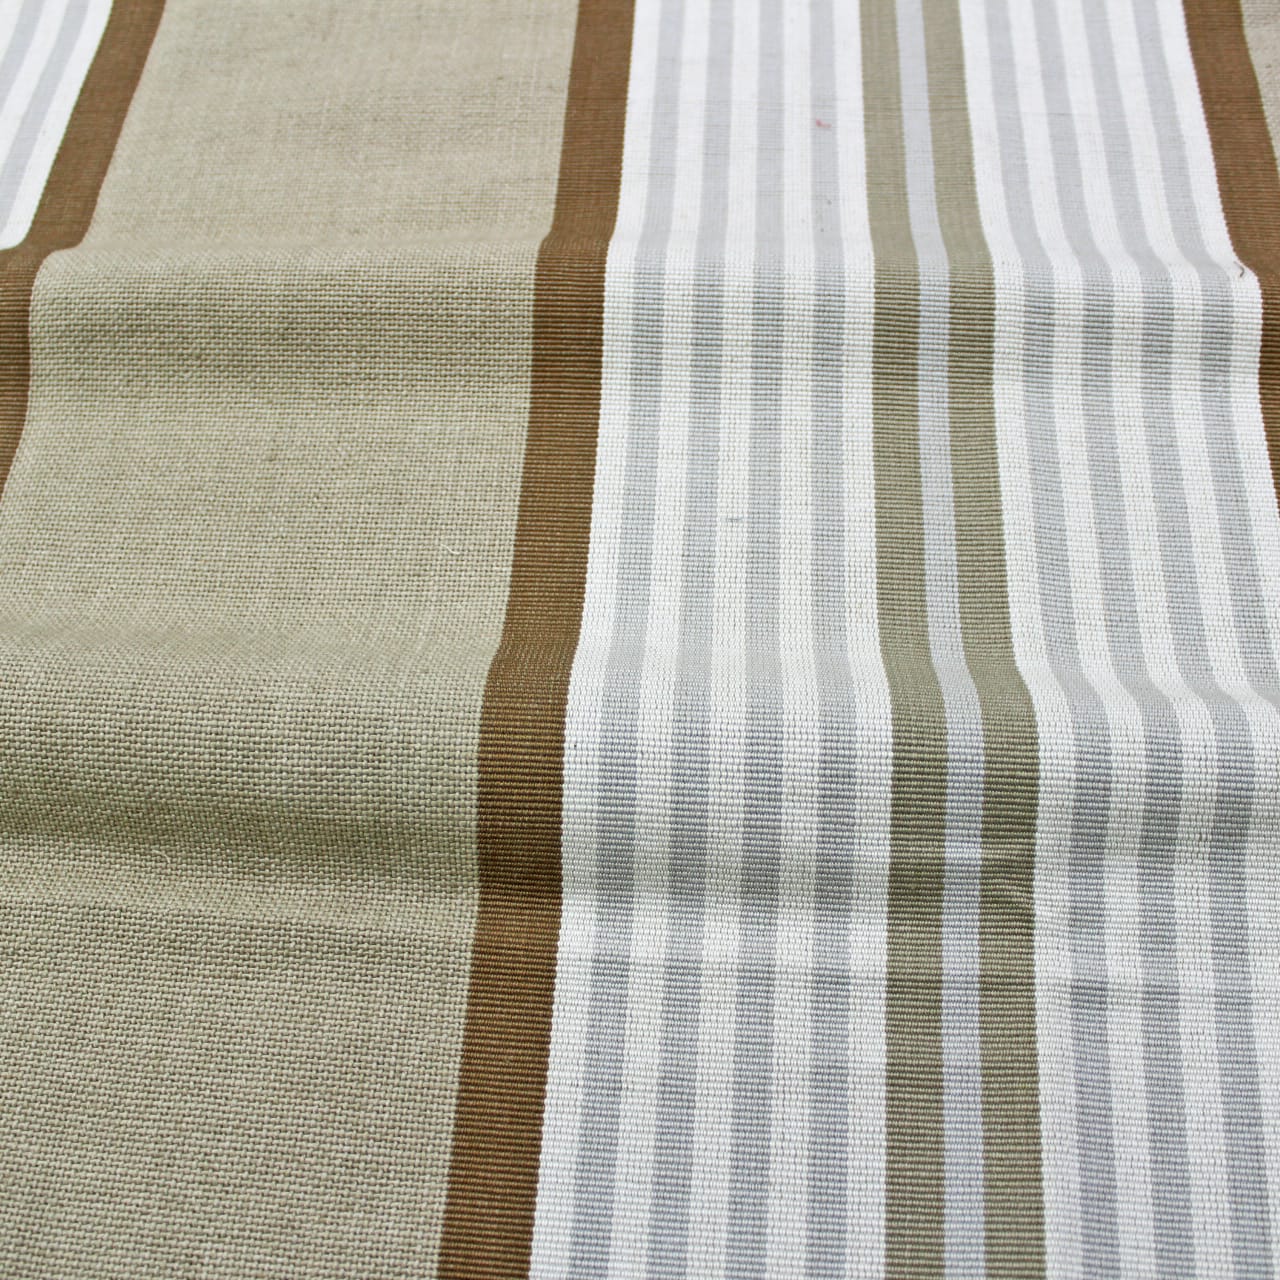 Alpha Khaki Woven Cotton Stripes Table Cover(1 Pc) online in India